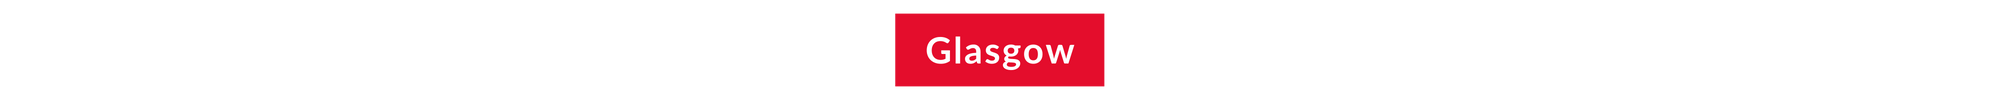 The word Glasgow in a red block